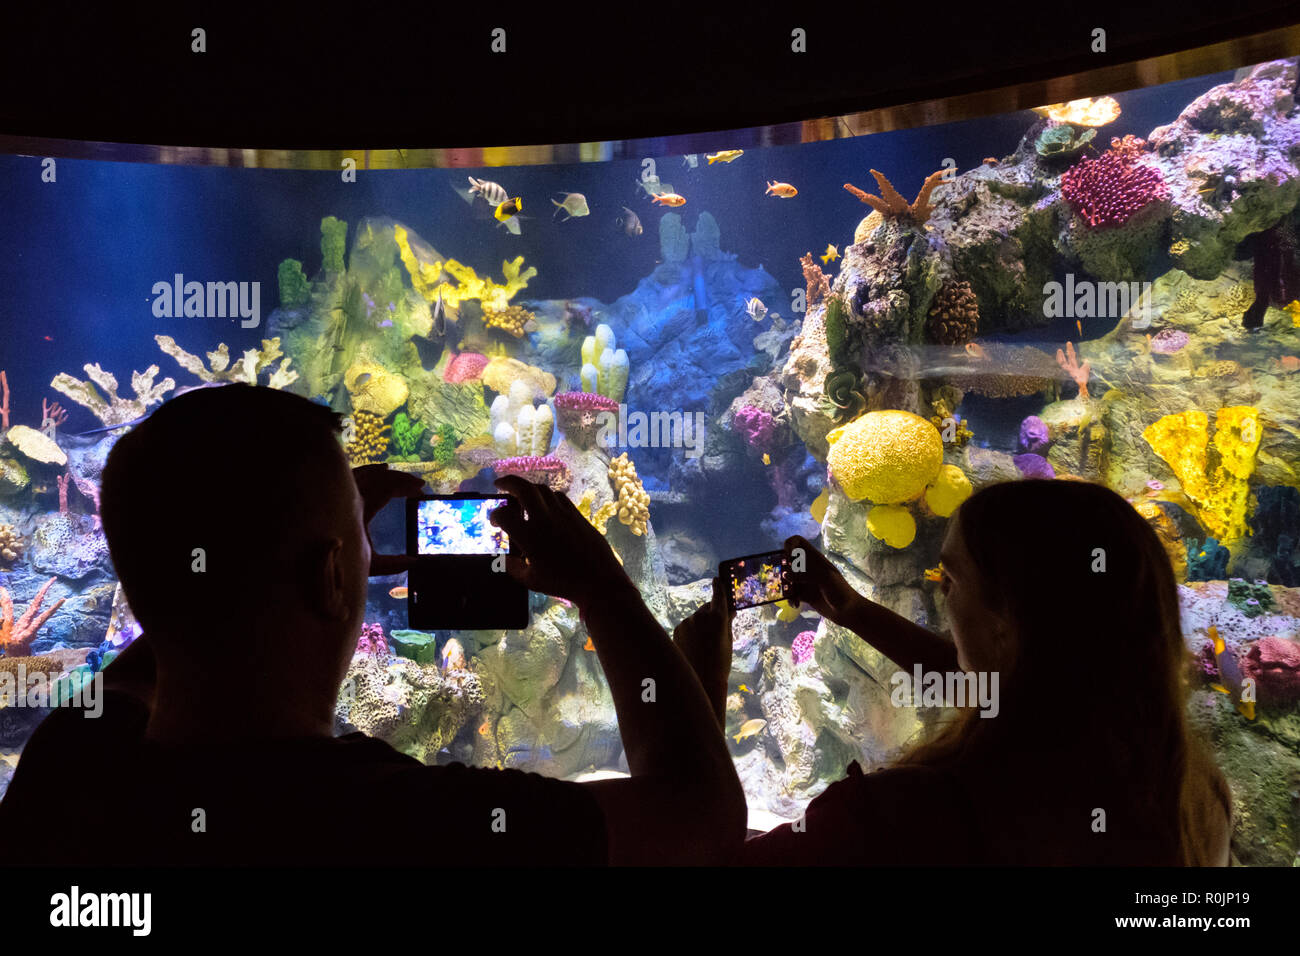 Tenerife, Canary Islands, Spain - september 2018: People taking pictures with mobile phone inside aquarium of the Loro Park (Loro Parque) Zoo in Tener Stock Photo